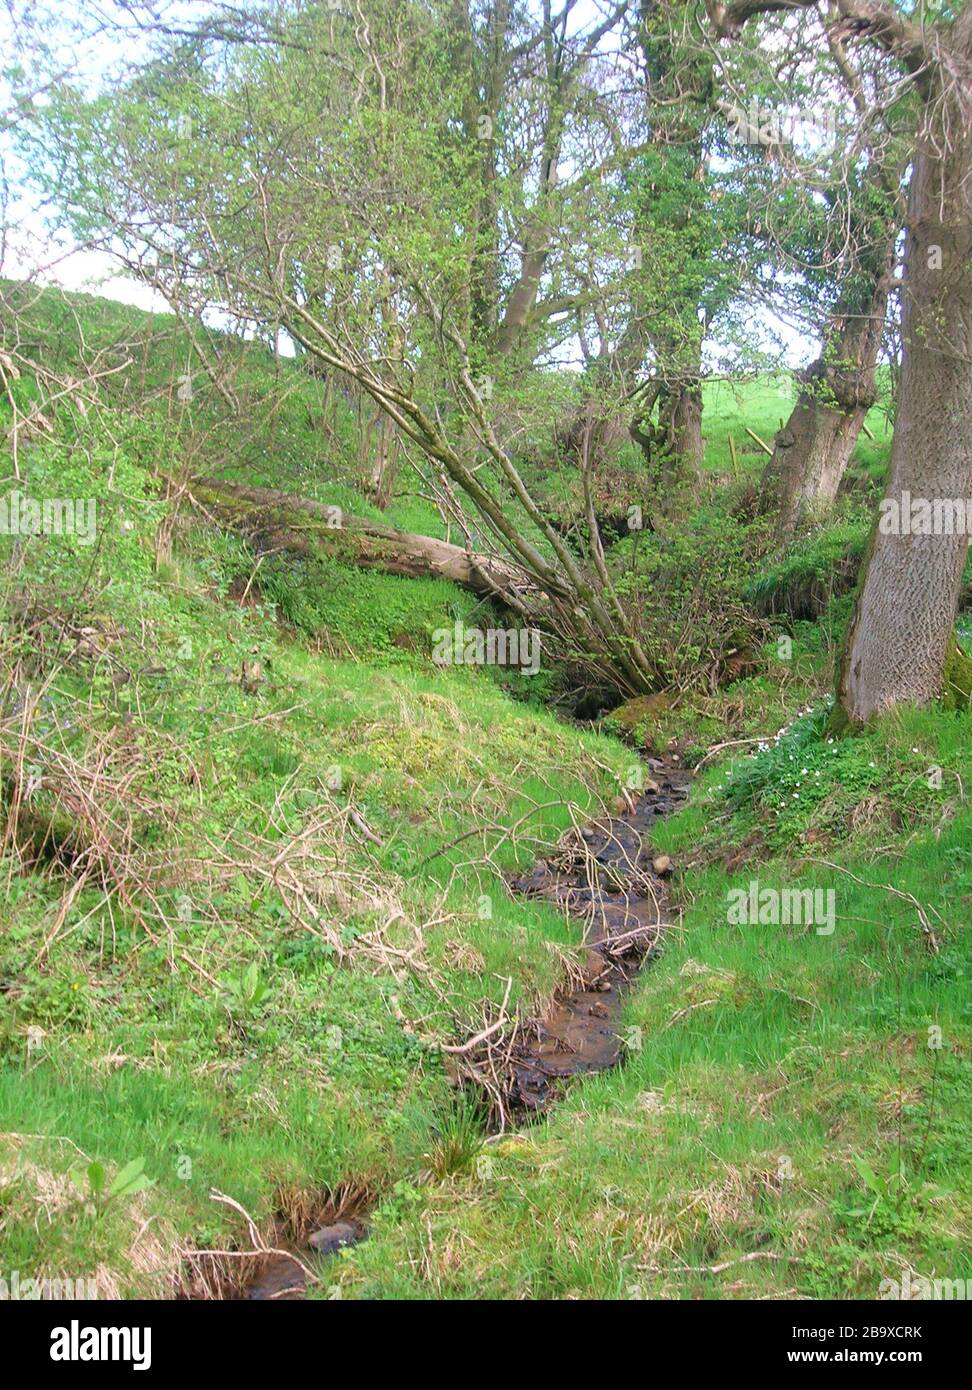 English: Near the site of St Anne's Holy Well on the Burnanne, Galston,  East Ayrshire, Scotland. 2007.; 25 April 2007 (original upload date); Own  work; Rosser1954 at English Wikipedia Stock Photo - Alamy